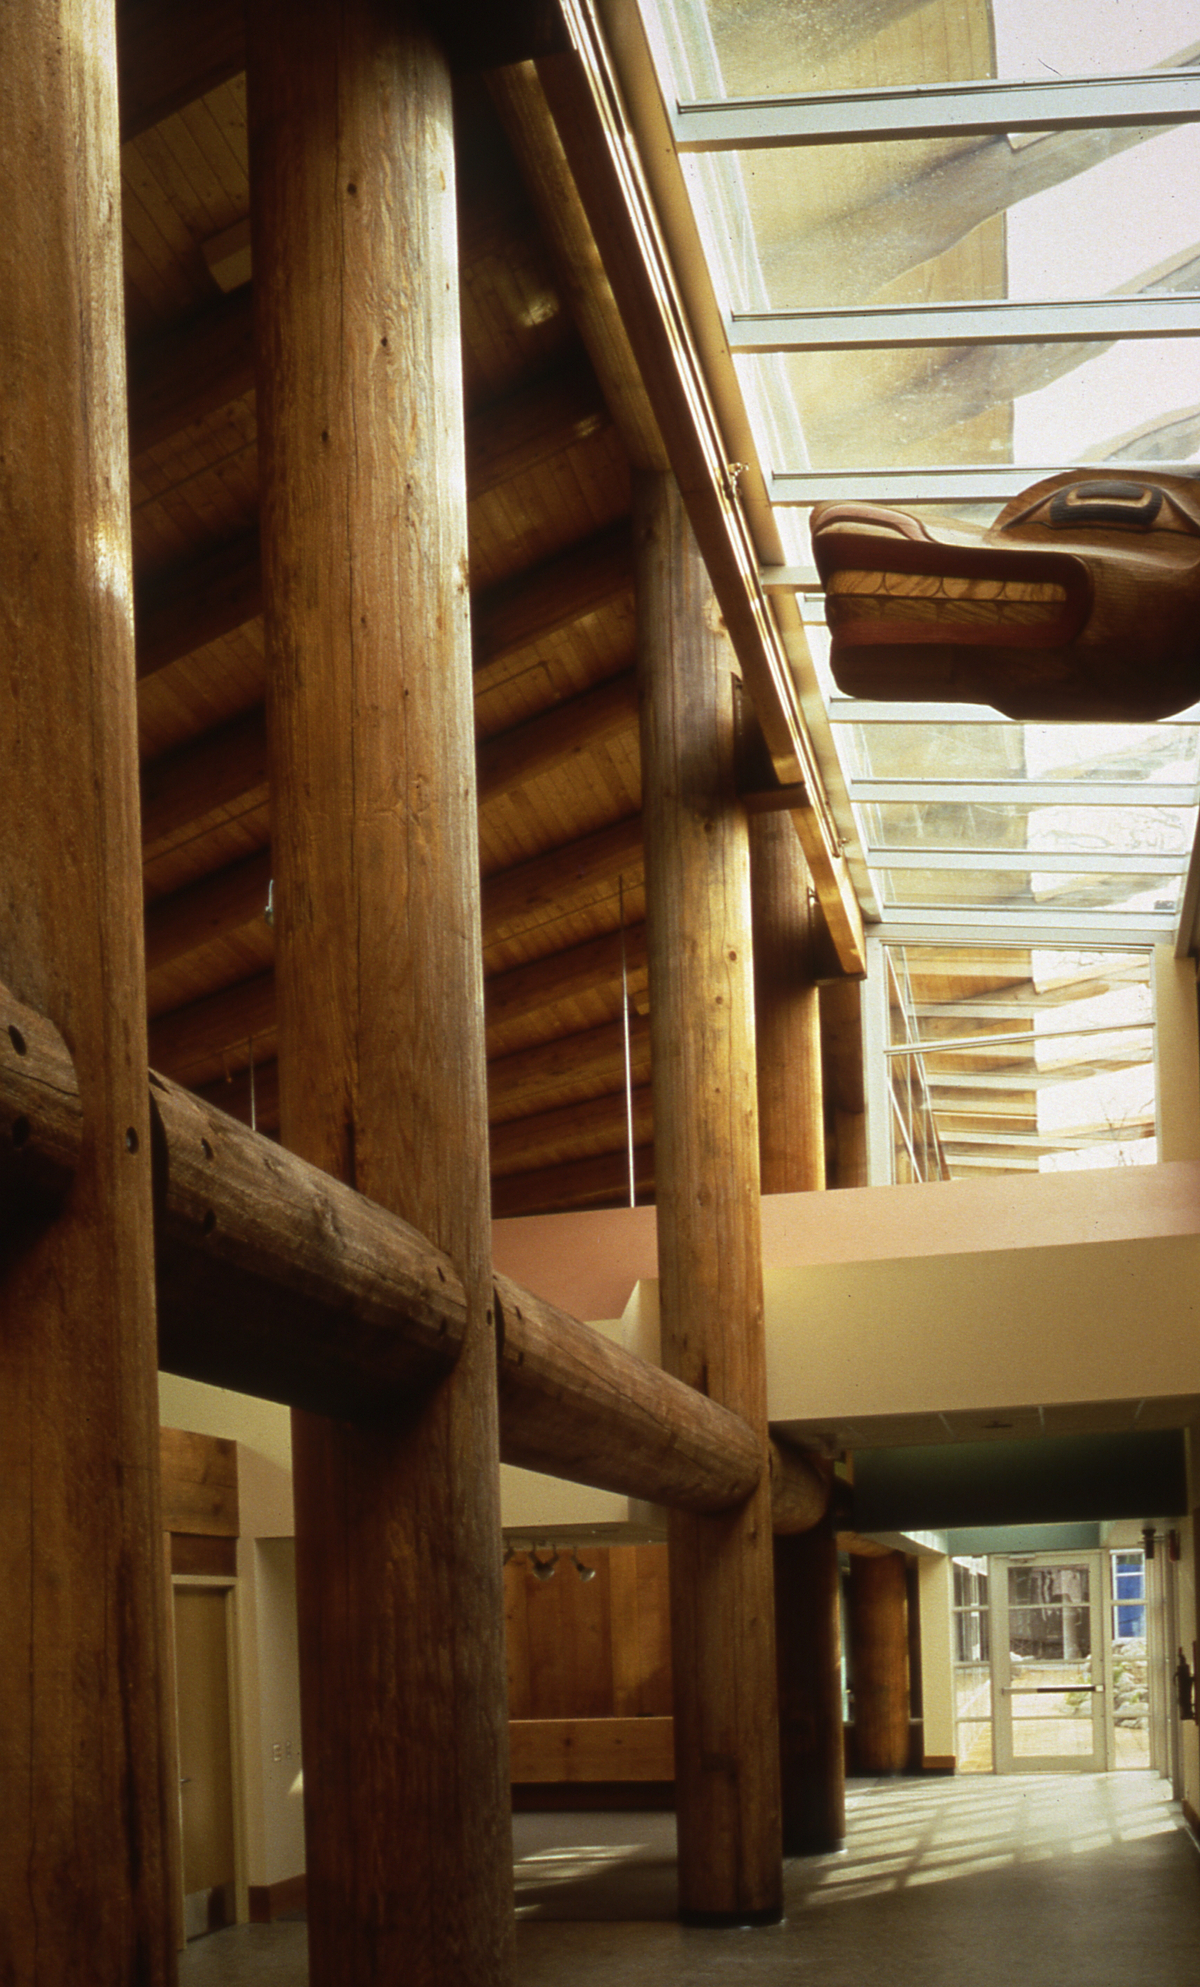 Indoor daytime image of First Nations Longhouse at The University of British Columbia showing massive timber pole beams and columns